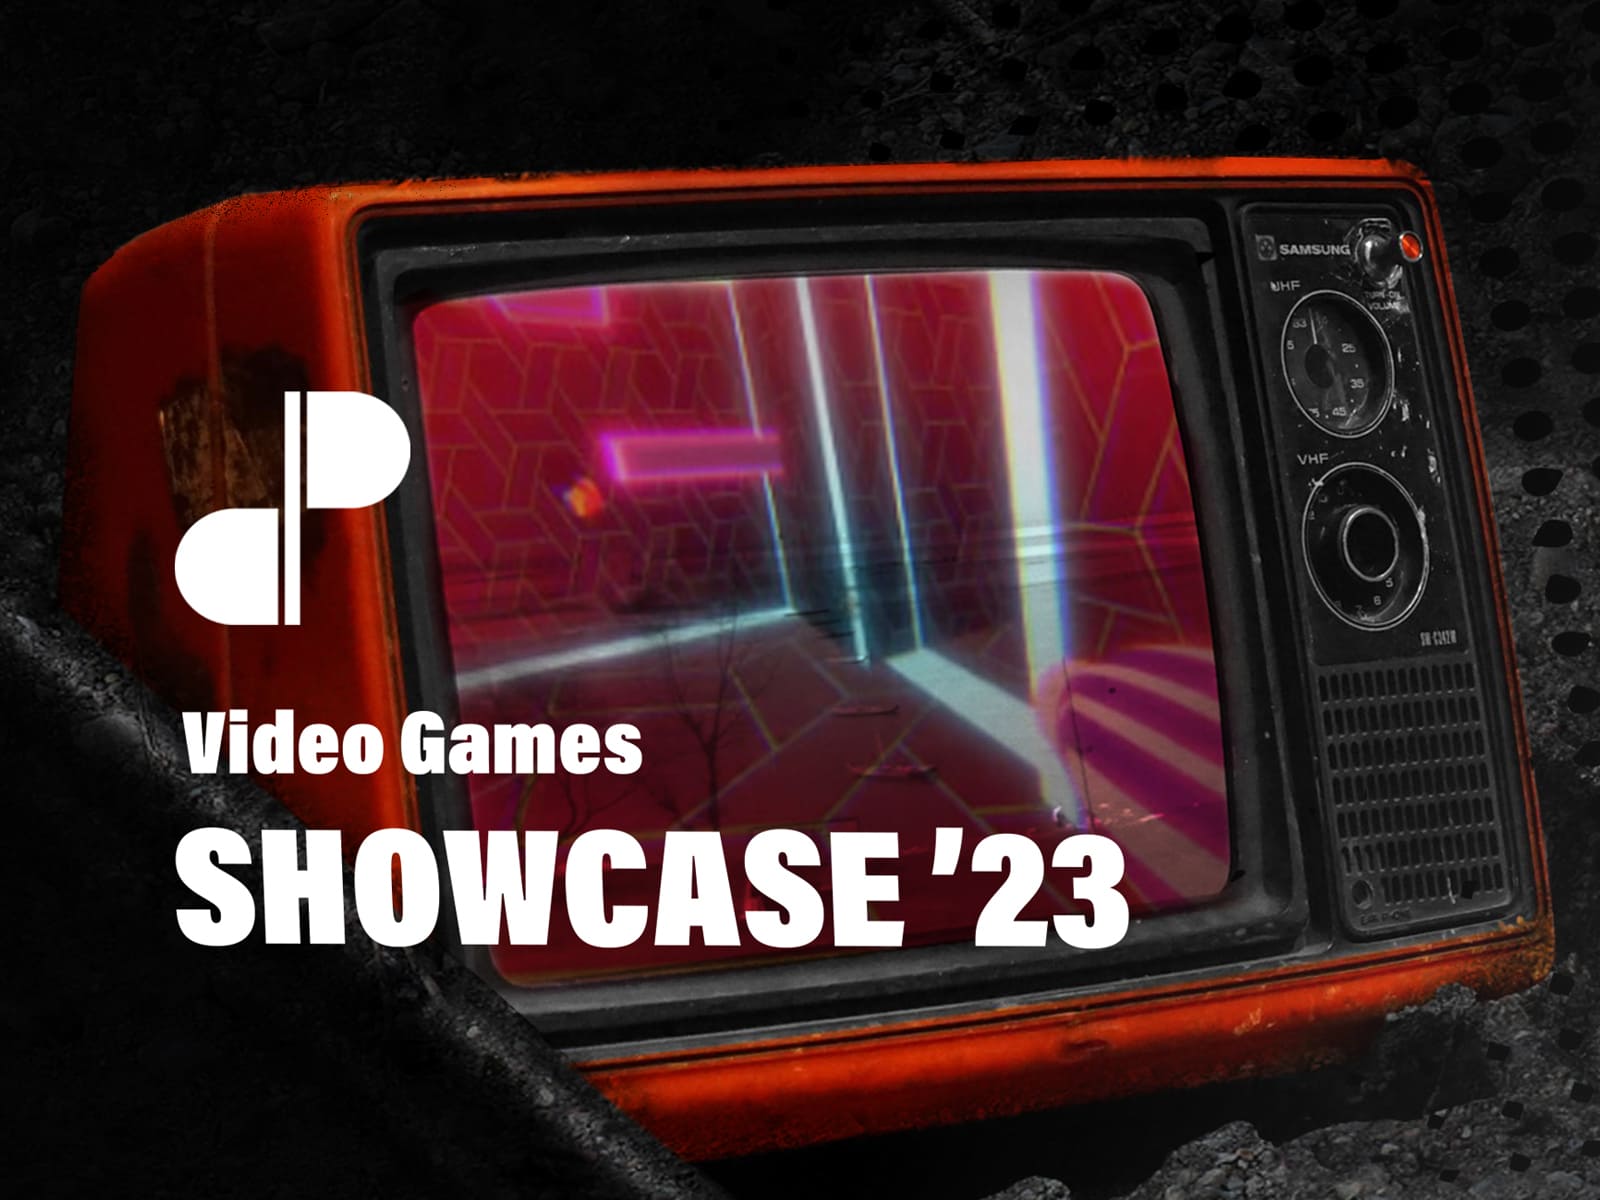 A Banner composed of the image of an old red television displaying a futuristic video game image with the Dragons shield of DigiPen, and a text that says: Video Games Showcase 2023. 